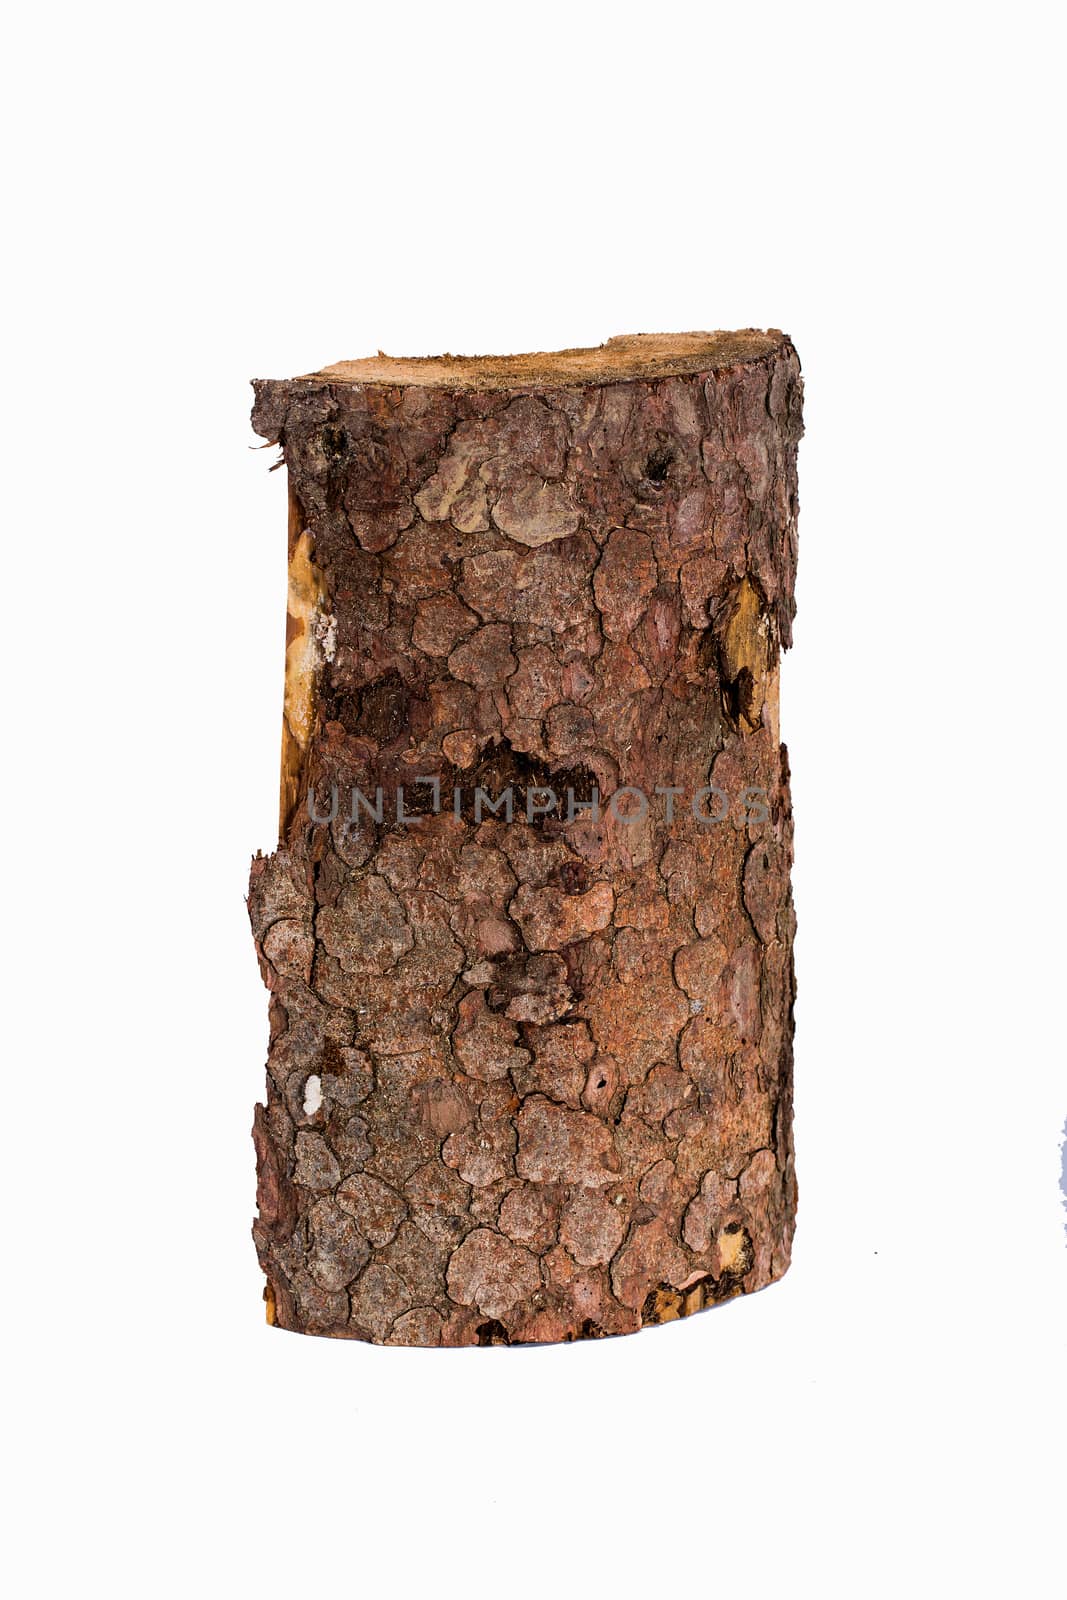 Just a piece of wood isolated on a white background